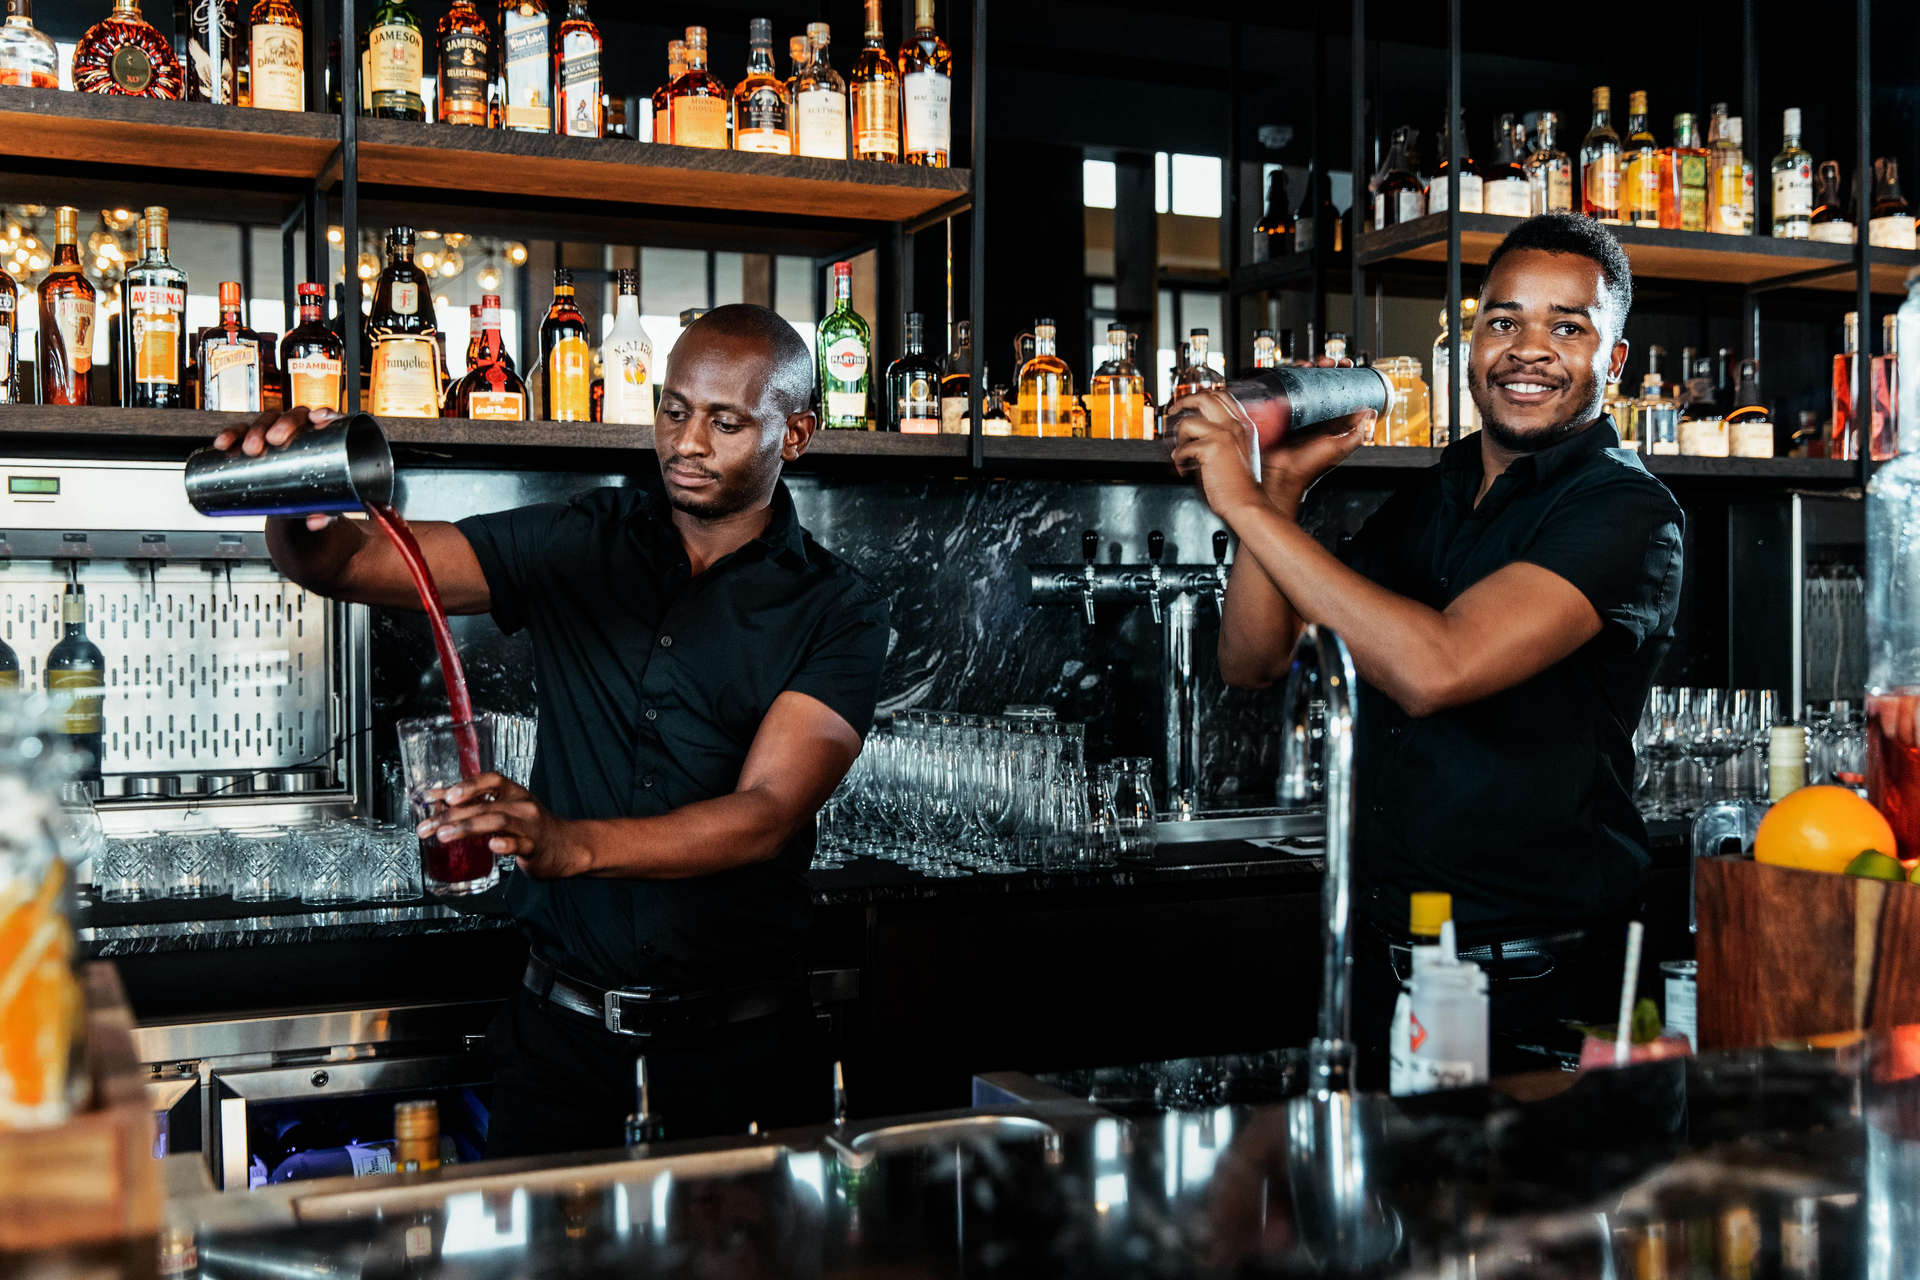 Bartenders mixing cocktails at Johannesburg Marriott Hotel Melrose Arch, South Africa